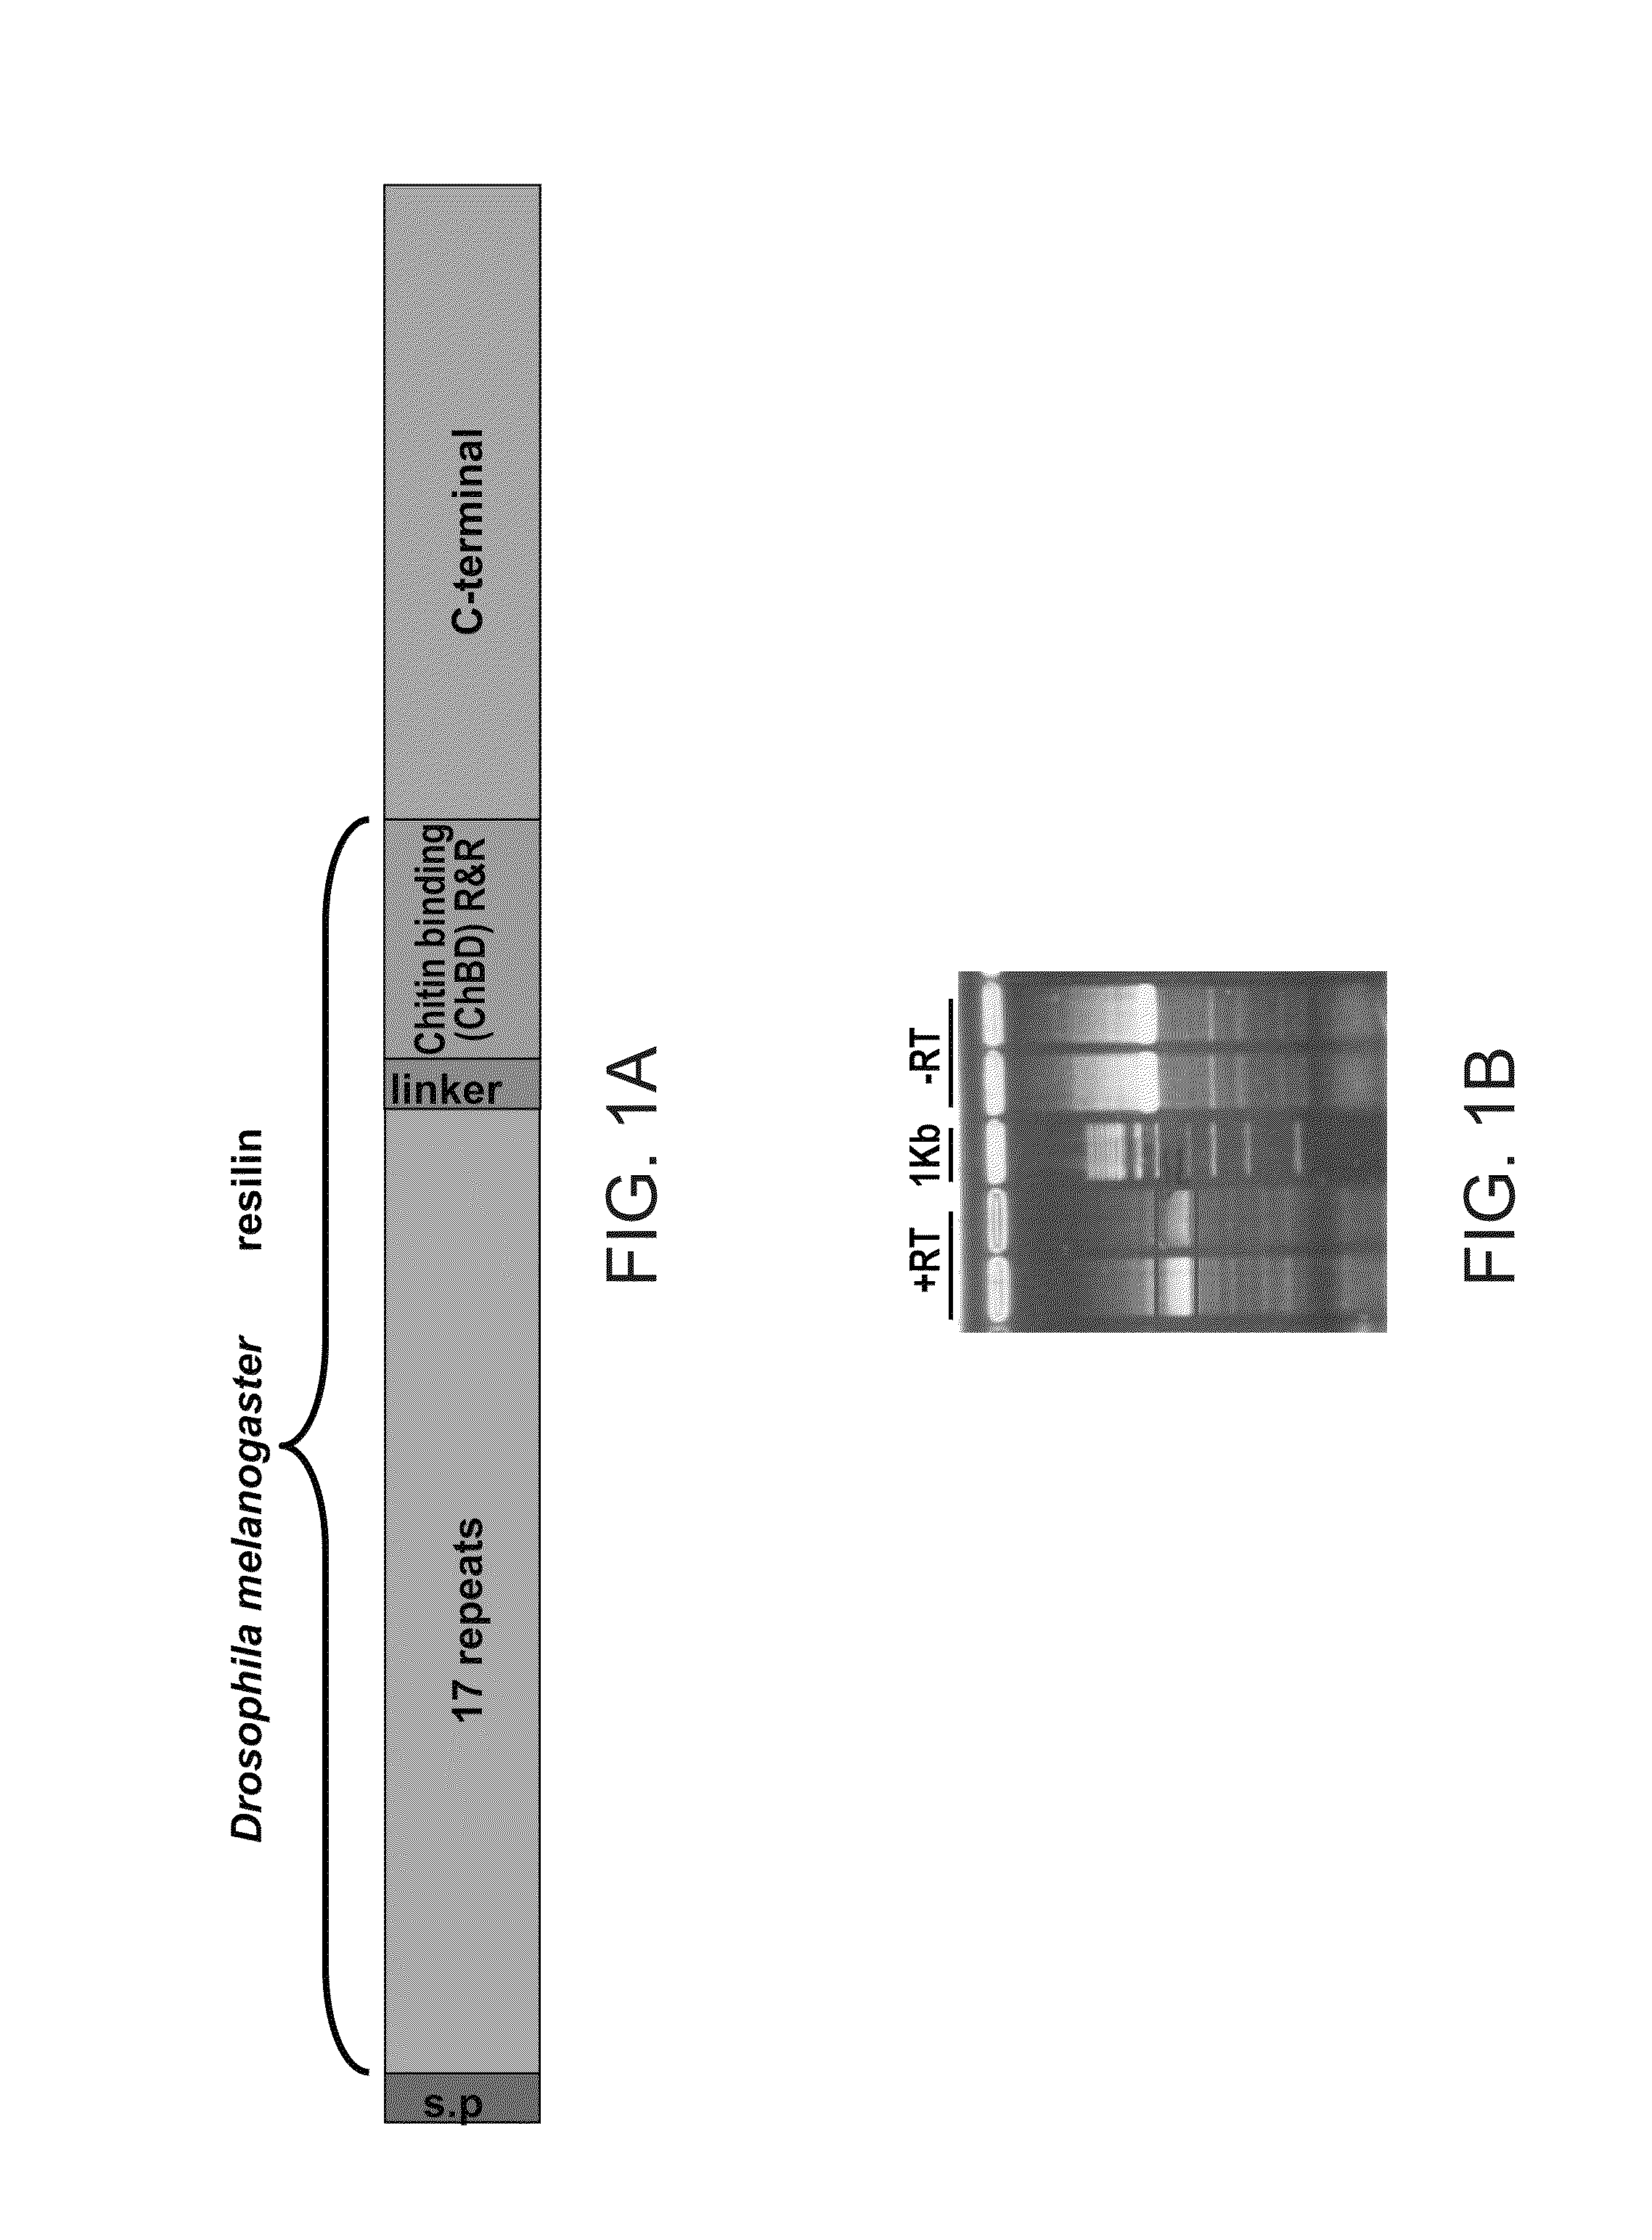 Compositions comprising fibrous polypeptides and polysaccharides